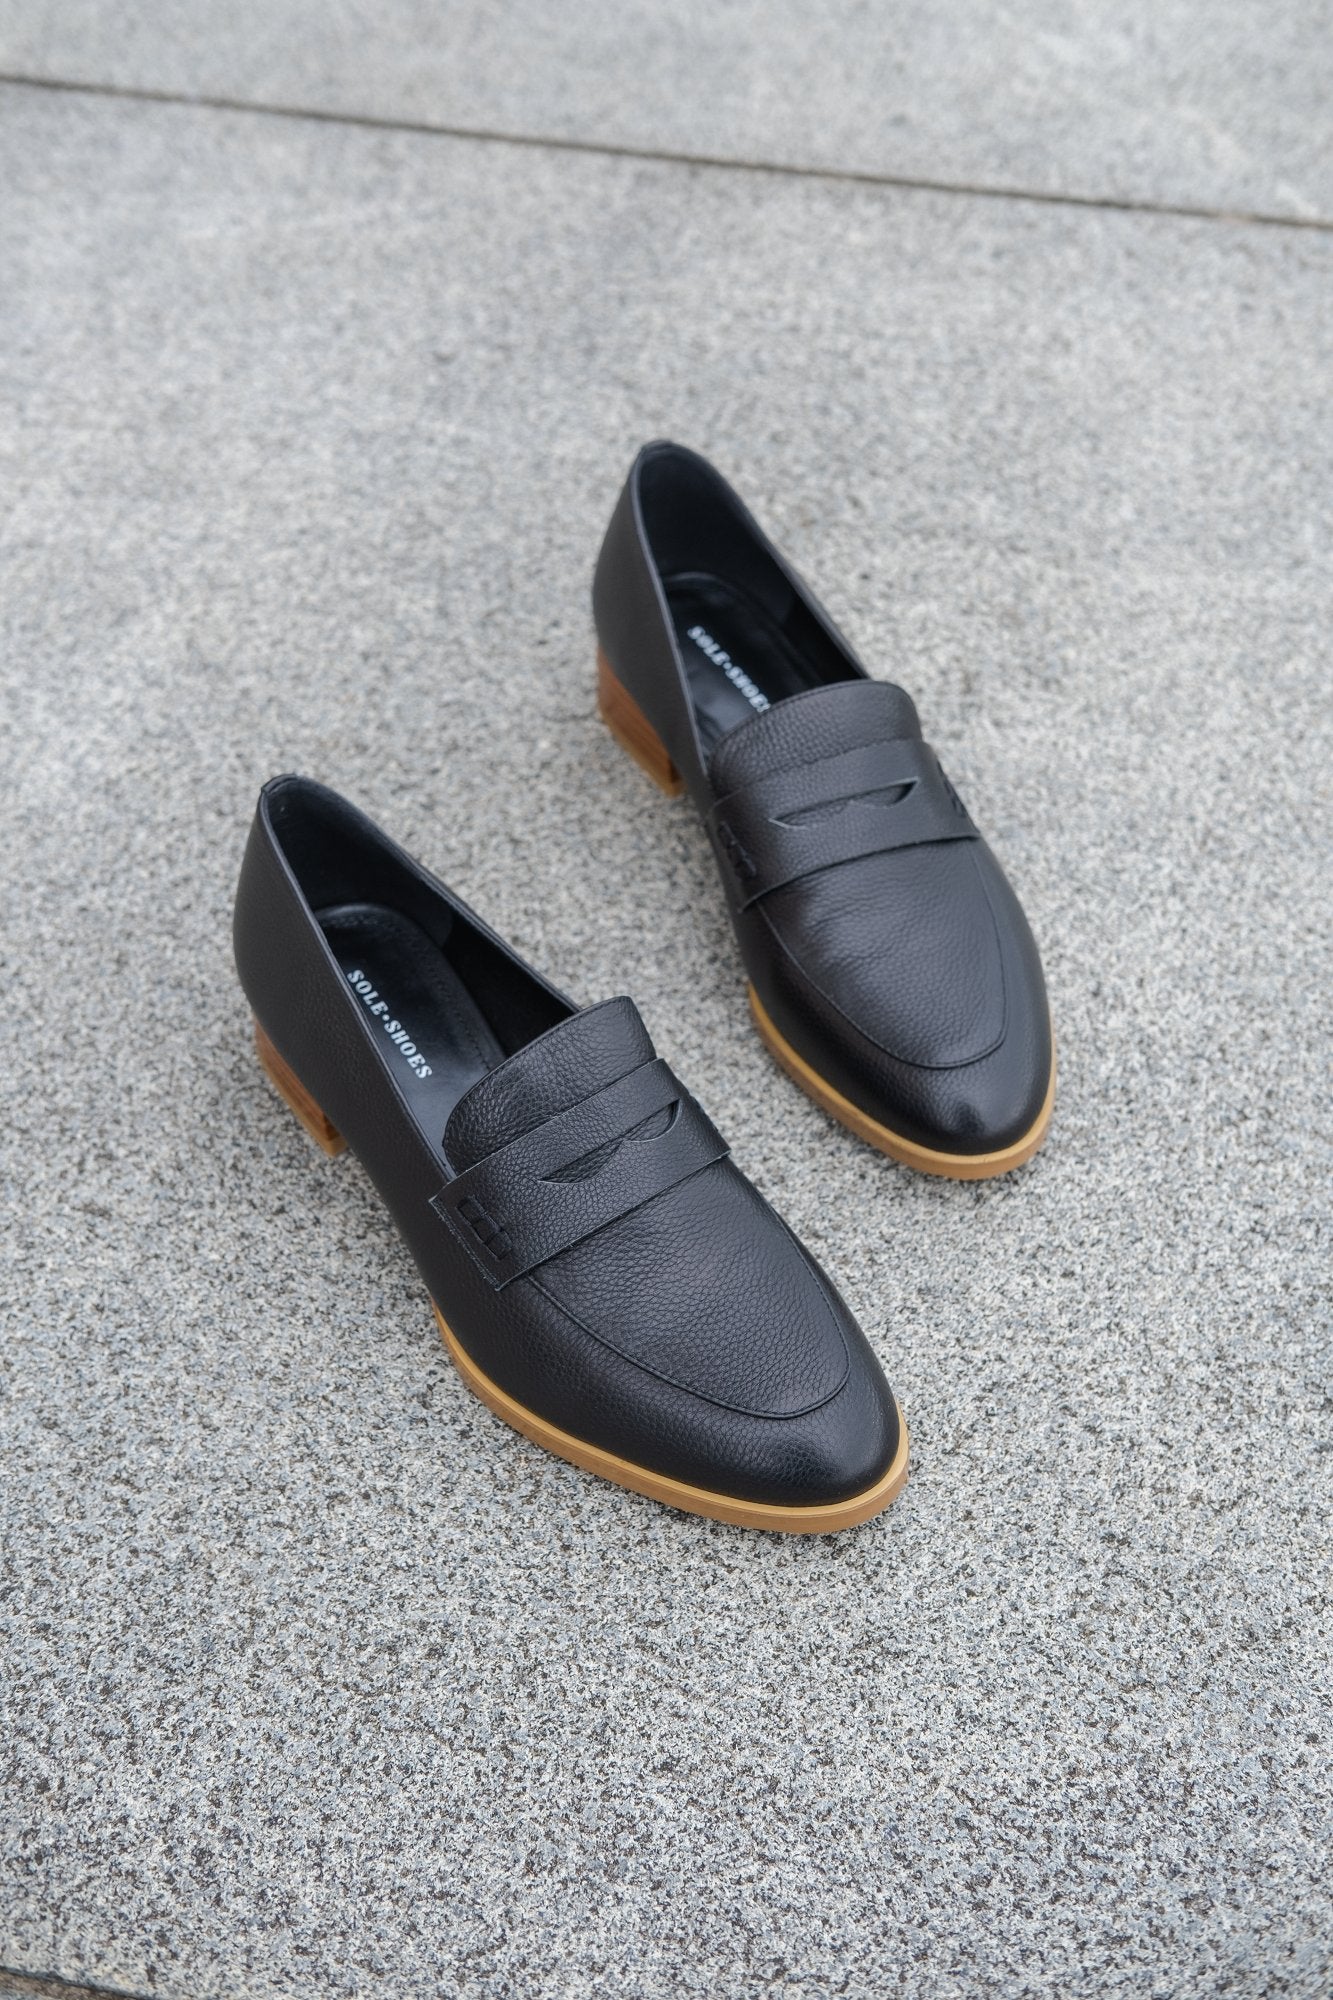 Marcel Leather Loafer Black Flats by Sole Shoes NZ F24-36